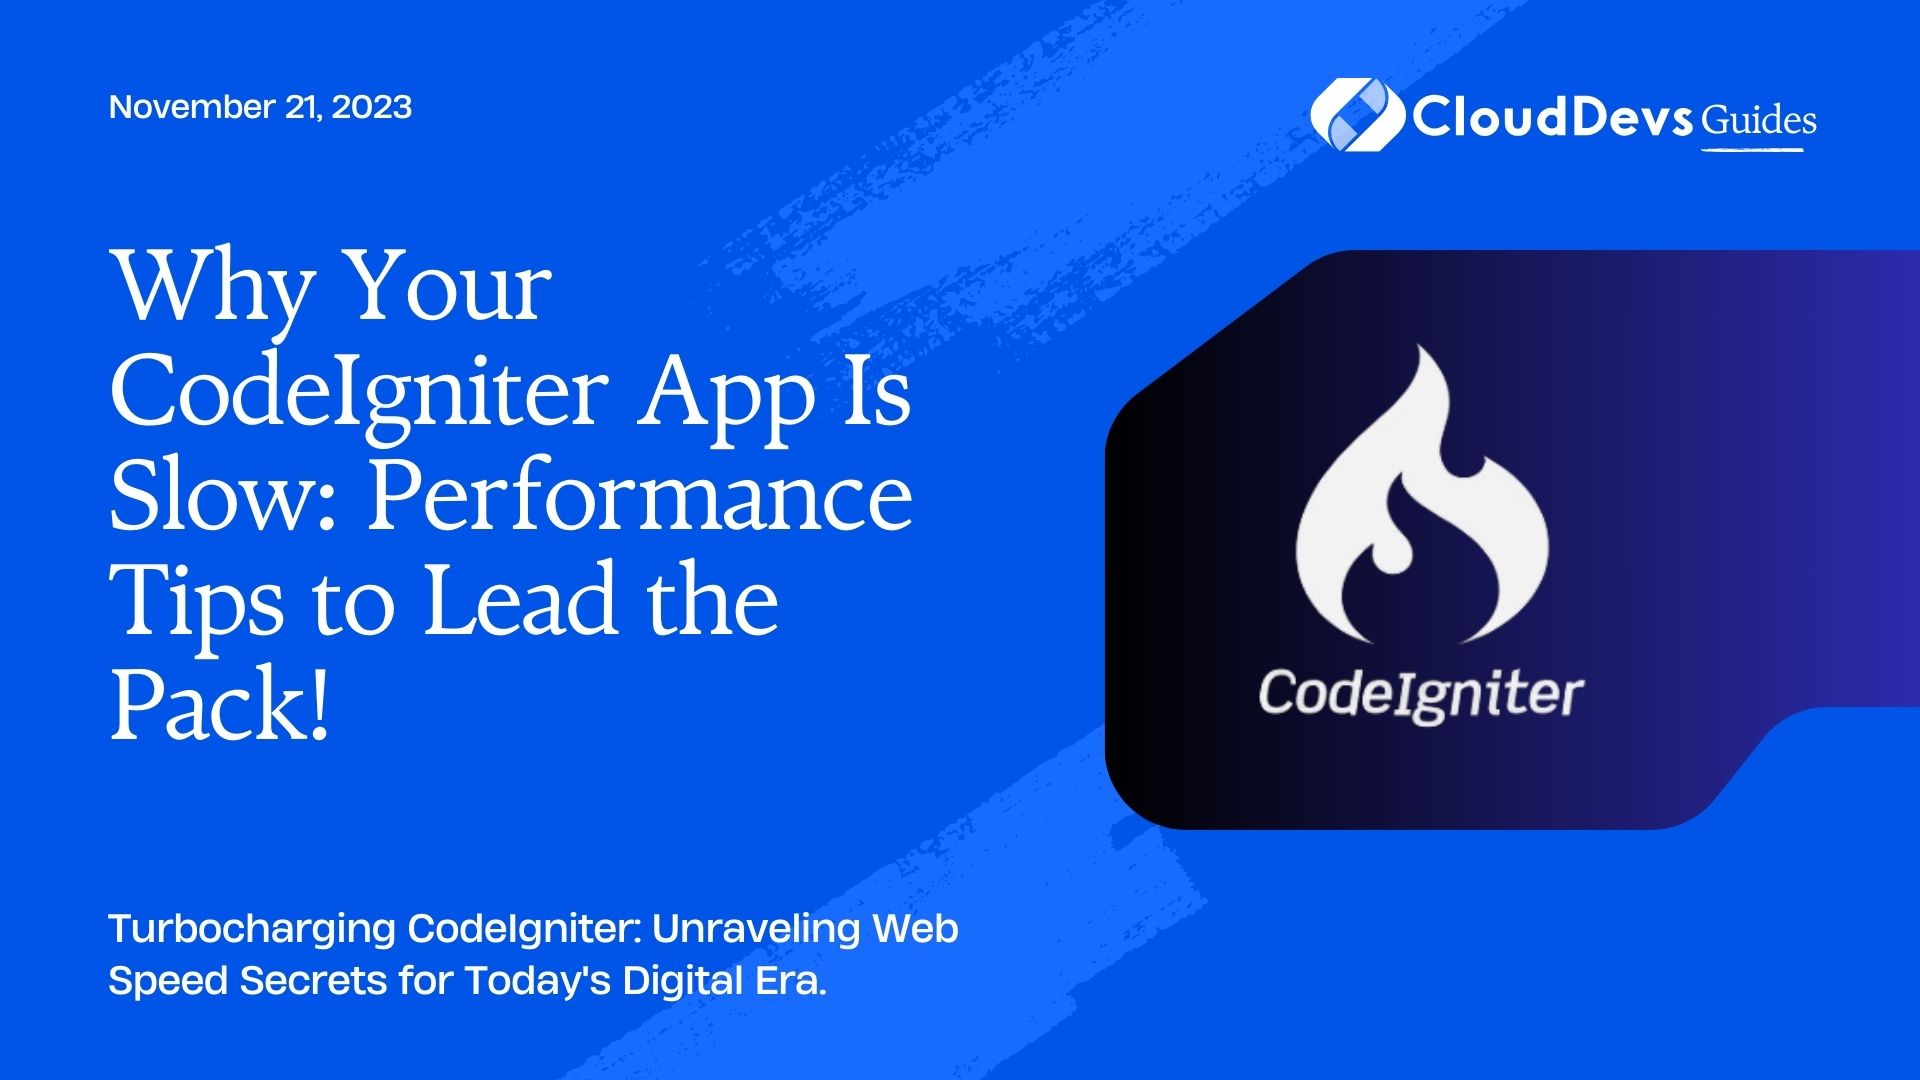 Why Your CodeIgniter App Is Slow: Performance Tips to Lead the Pack!